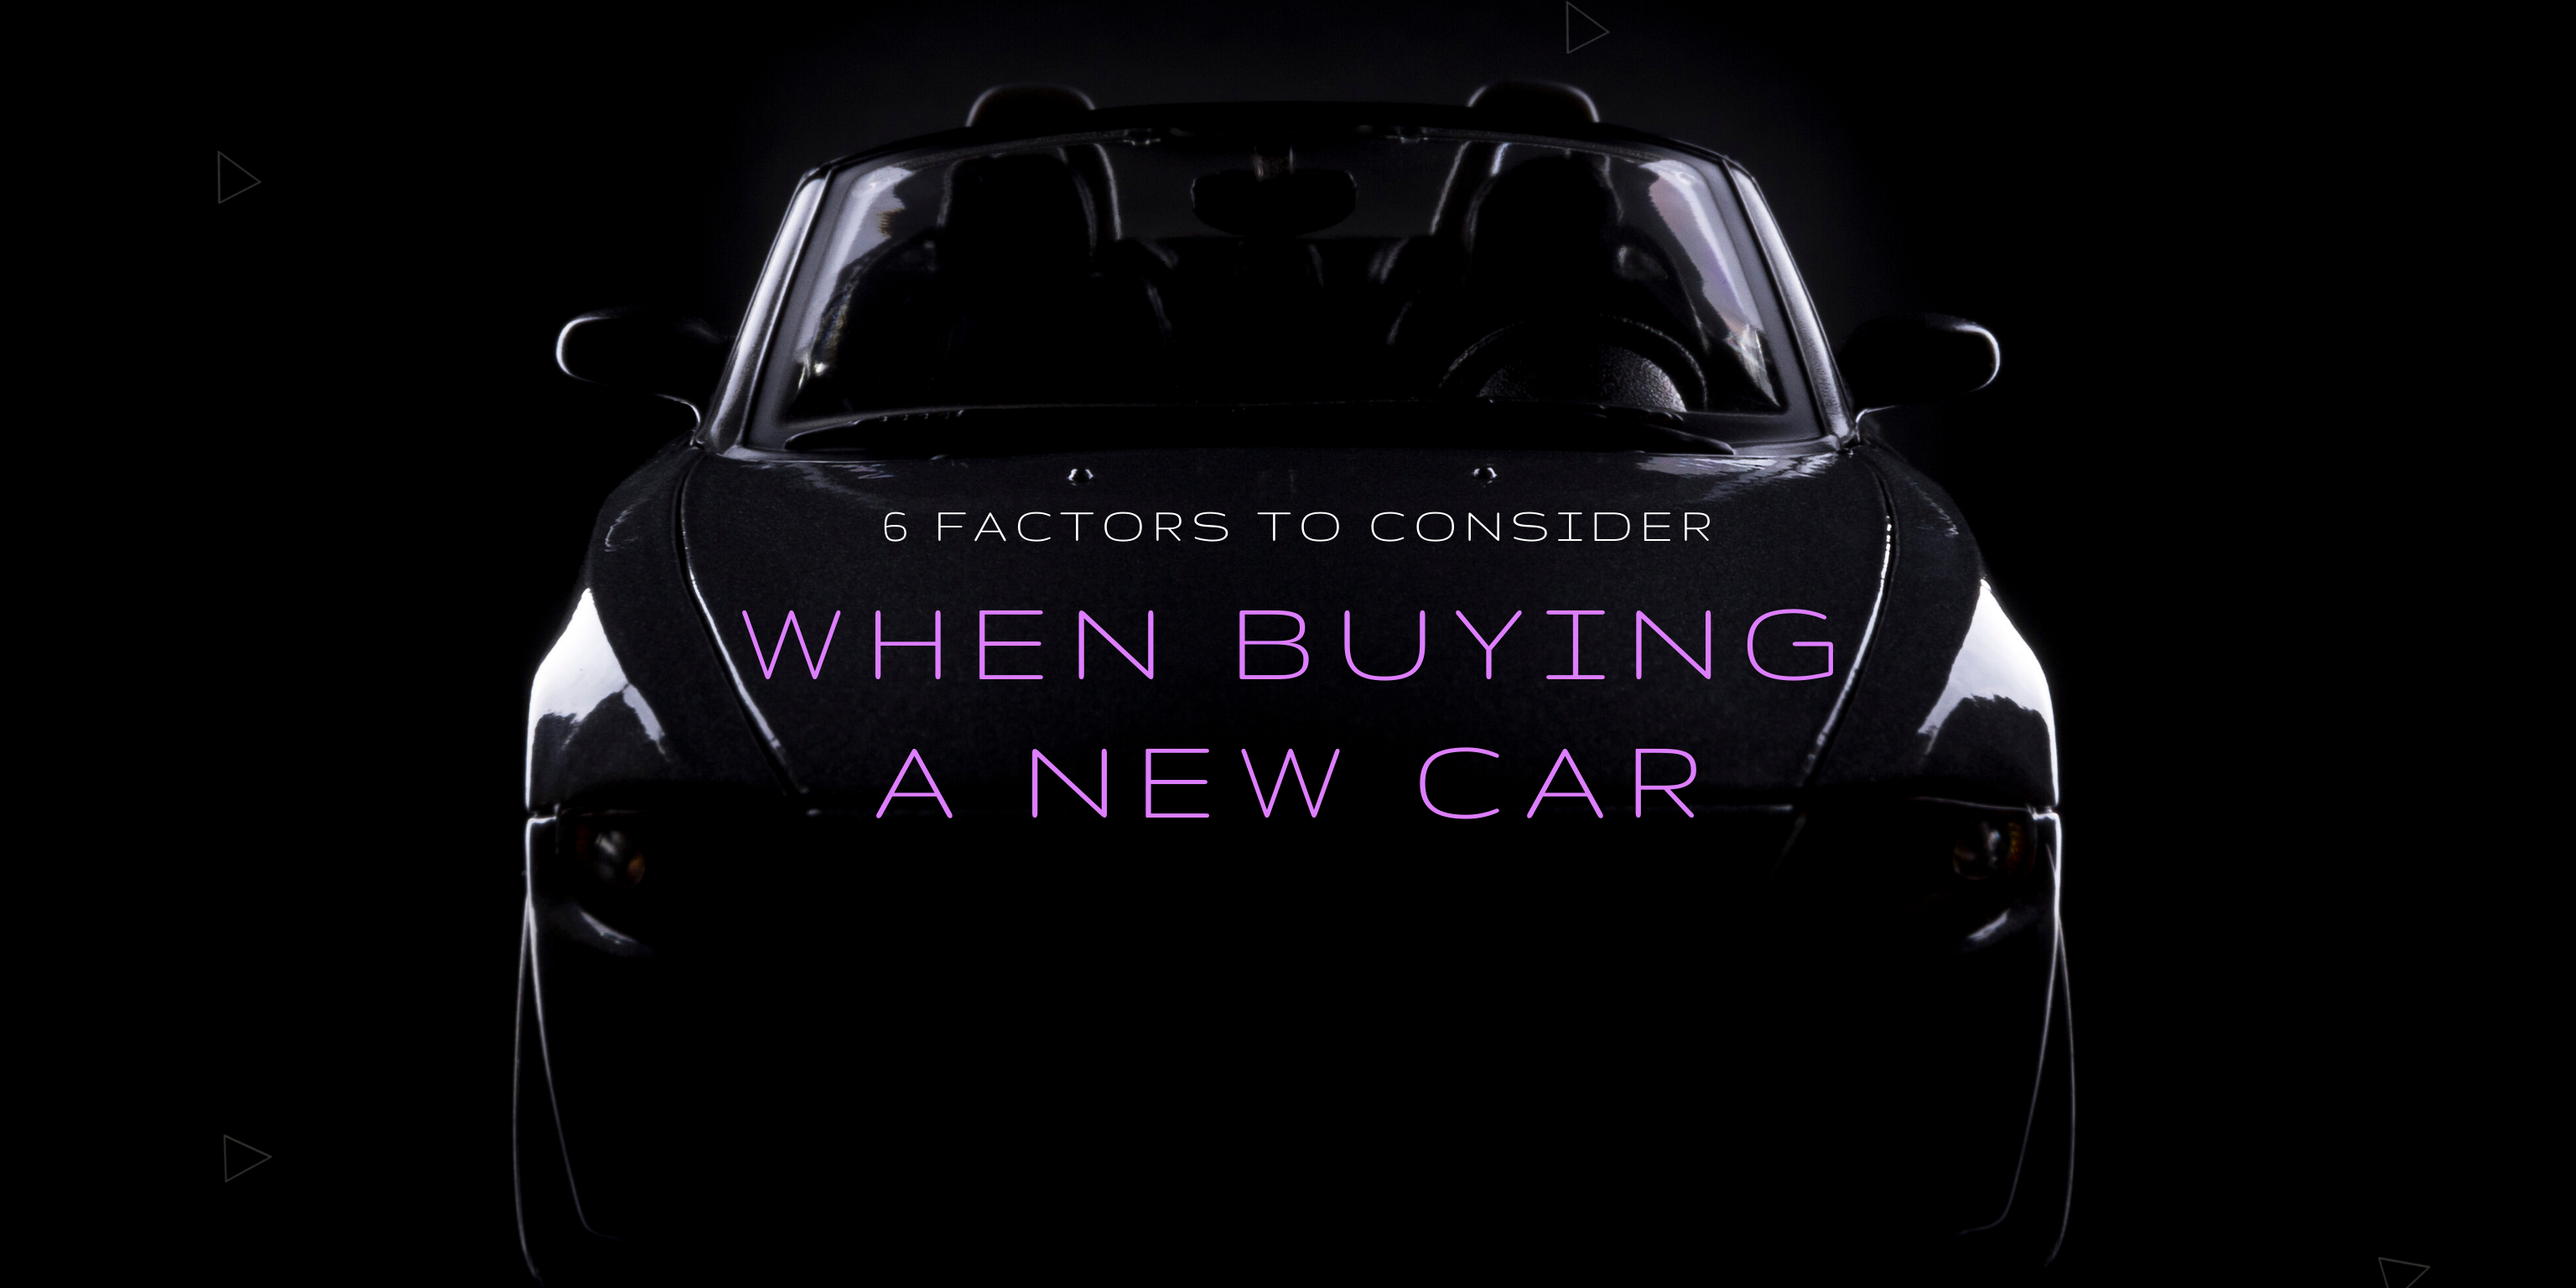 6 Factors to Consider When Buying a New Car